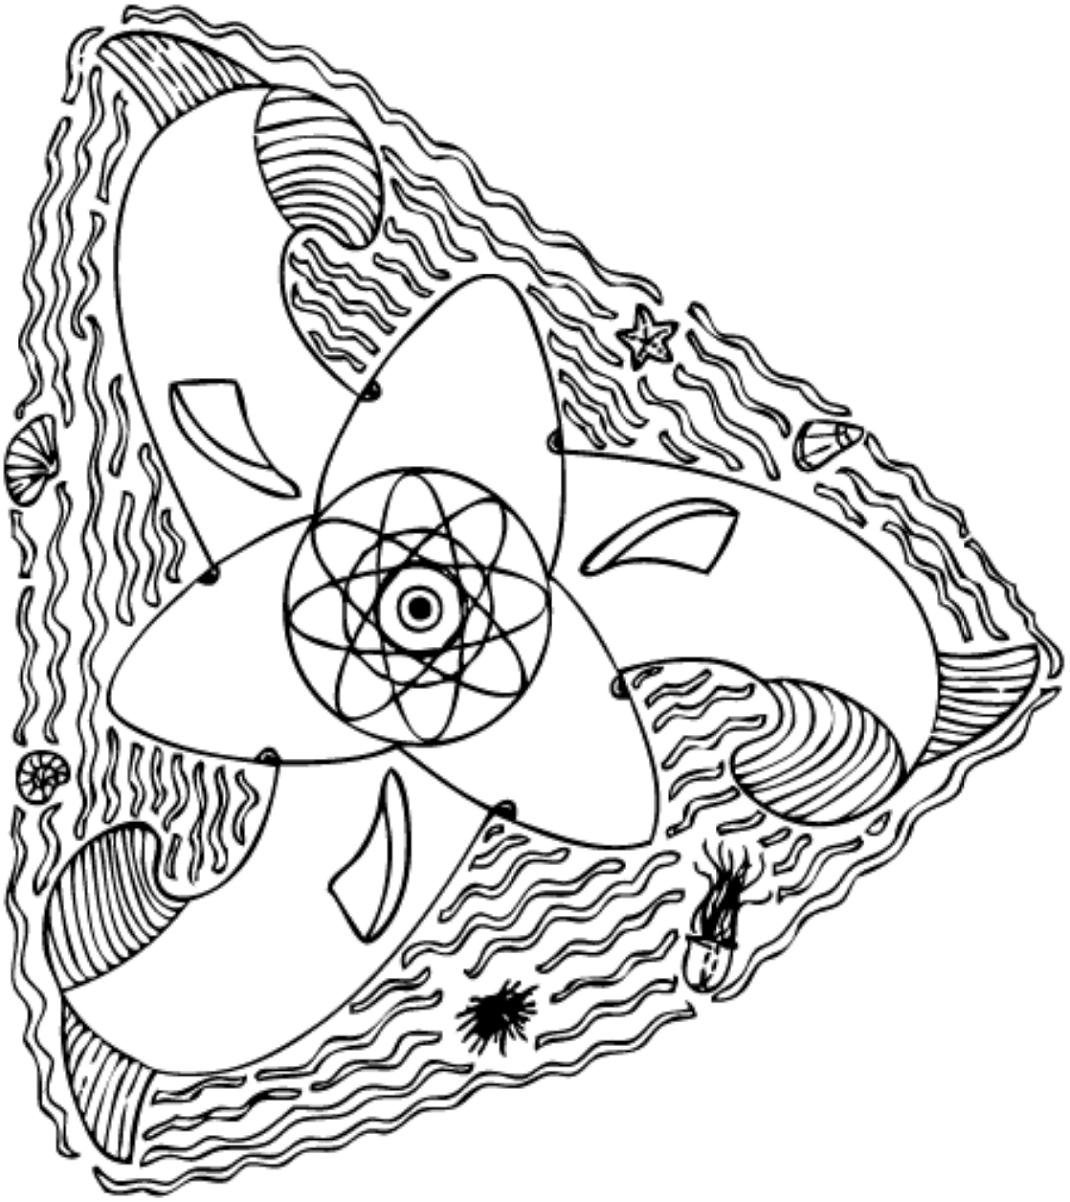 Special Whale Coloring Page